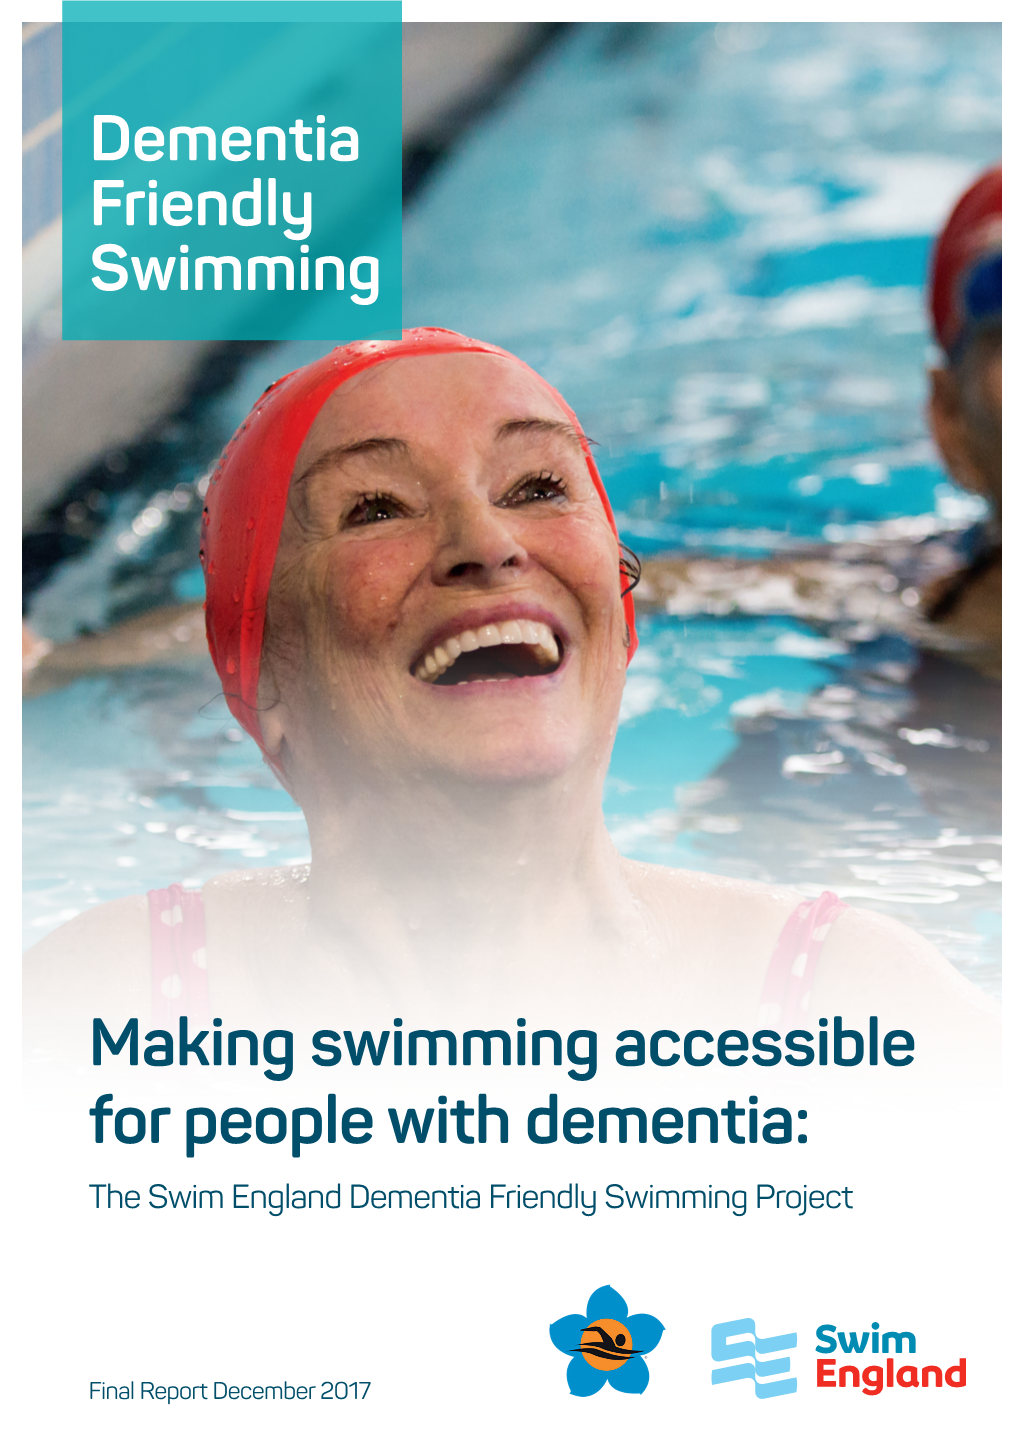 Making Swimming Accessible for People with Dementia: the Swim England Dementia Friendly Swimming Project